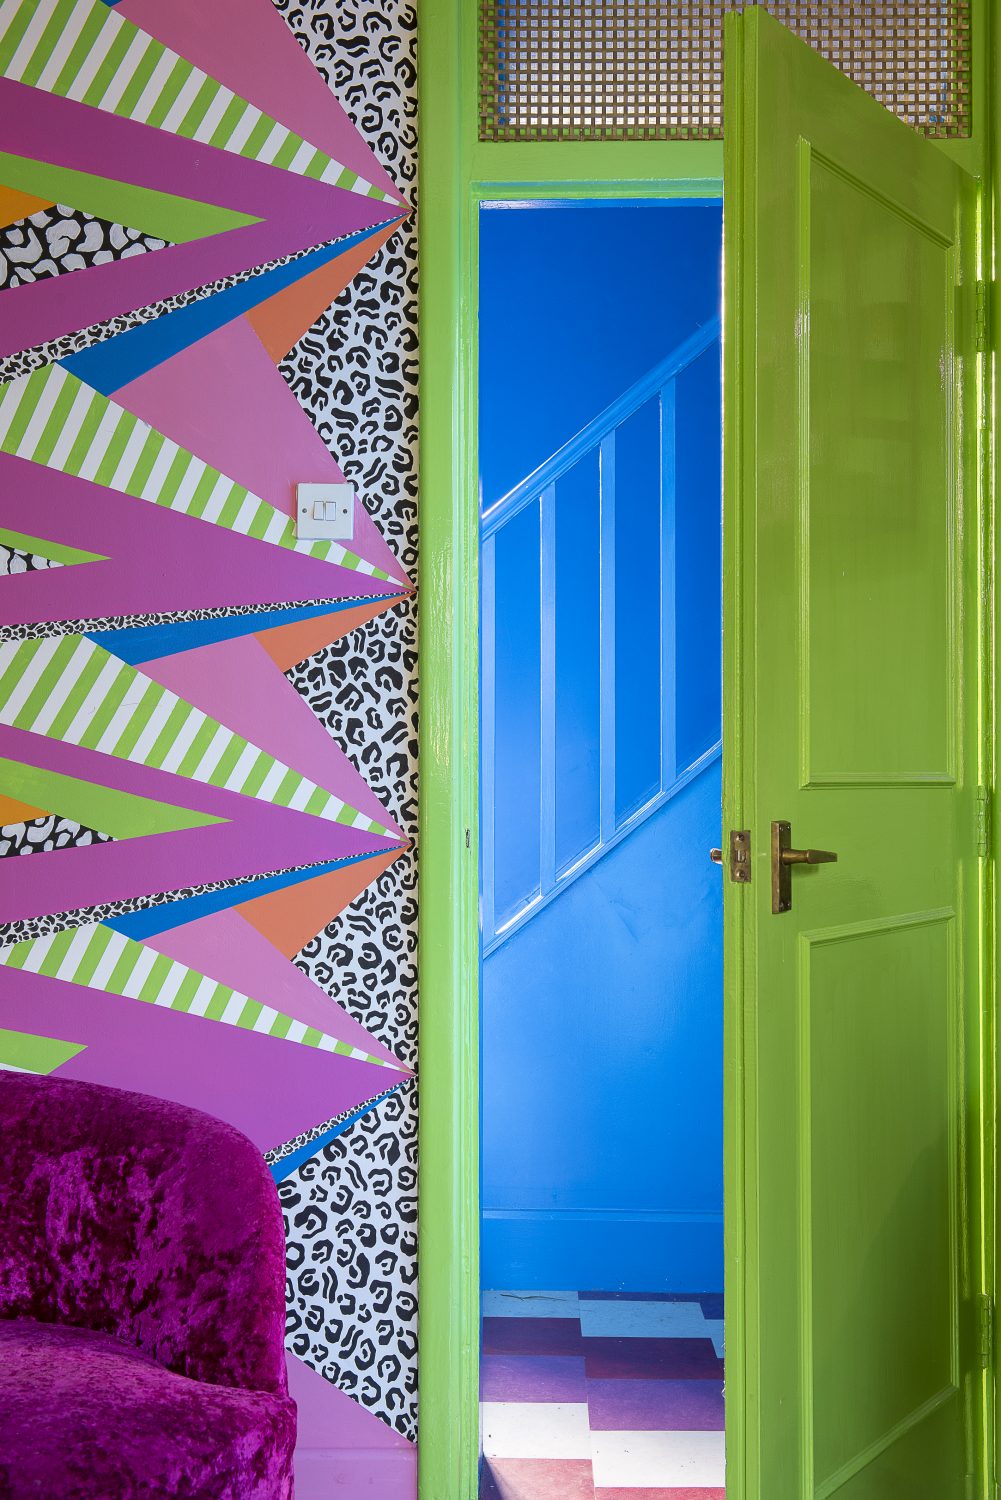 Amy has hand painted her unique and colourful designs, sourcing a good deal of her furnishings from Margate. “There’s some interesting things here. It’s quite junky and there’s a lot of mid-century stuff around the place.” The bright pink sofa came from the Yard in the Old Town